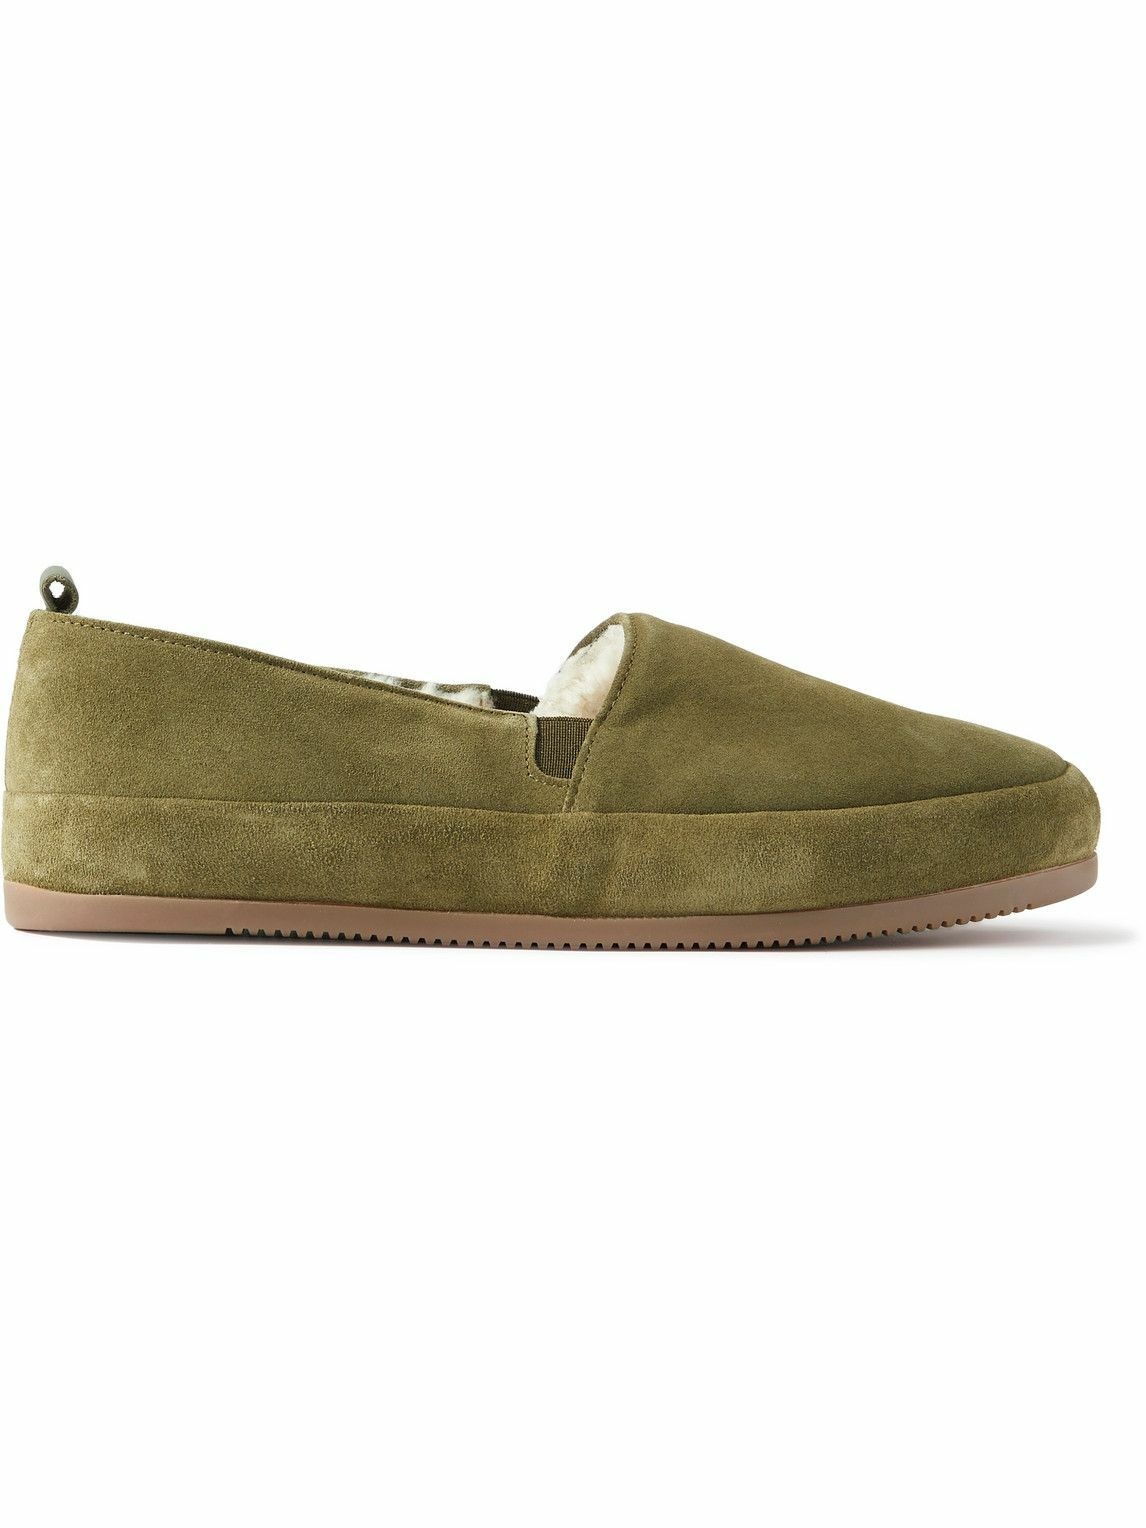 Photo: Mulo - Shearling-Lined Suede Slippers - Green